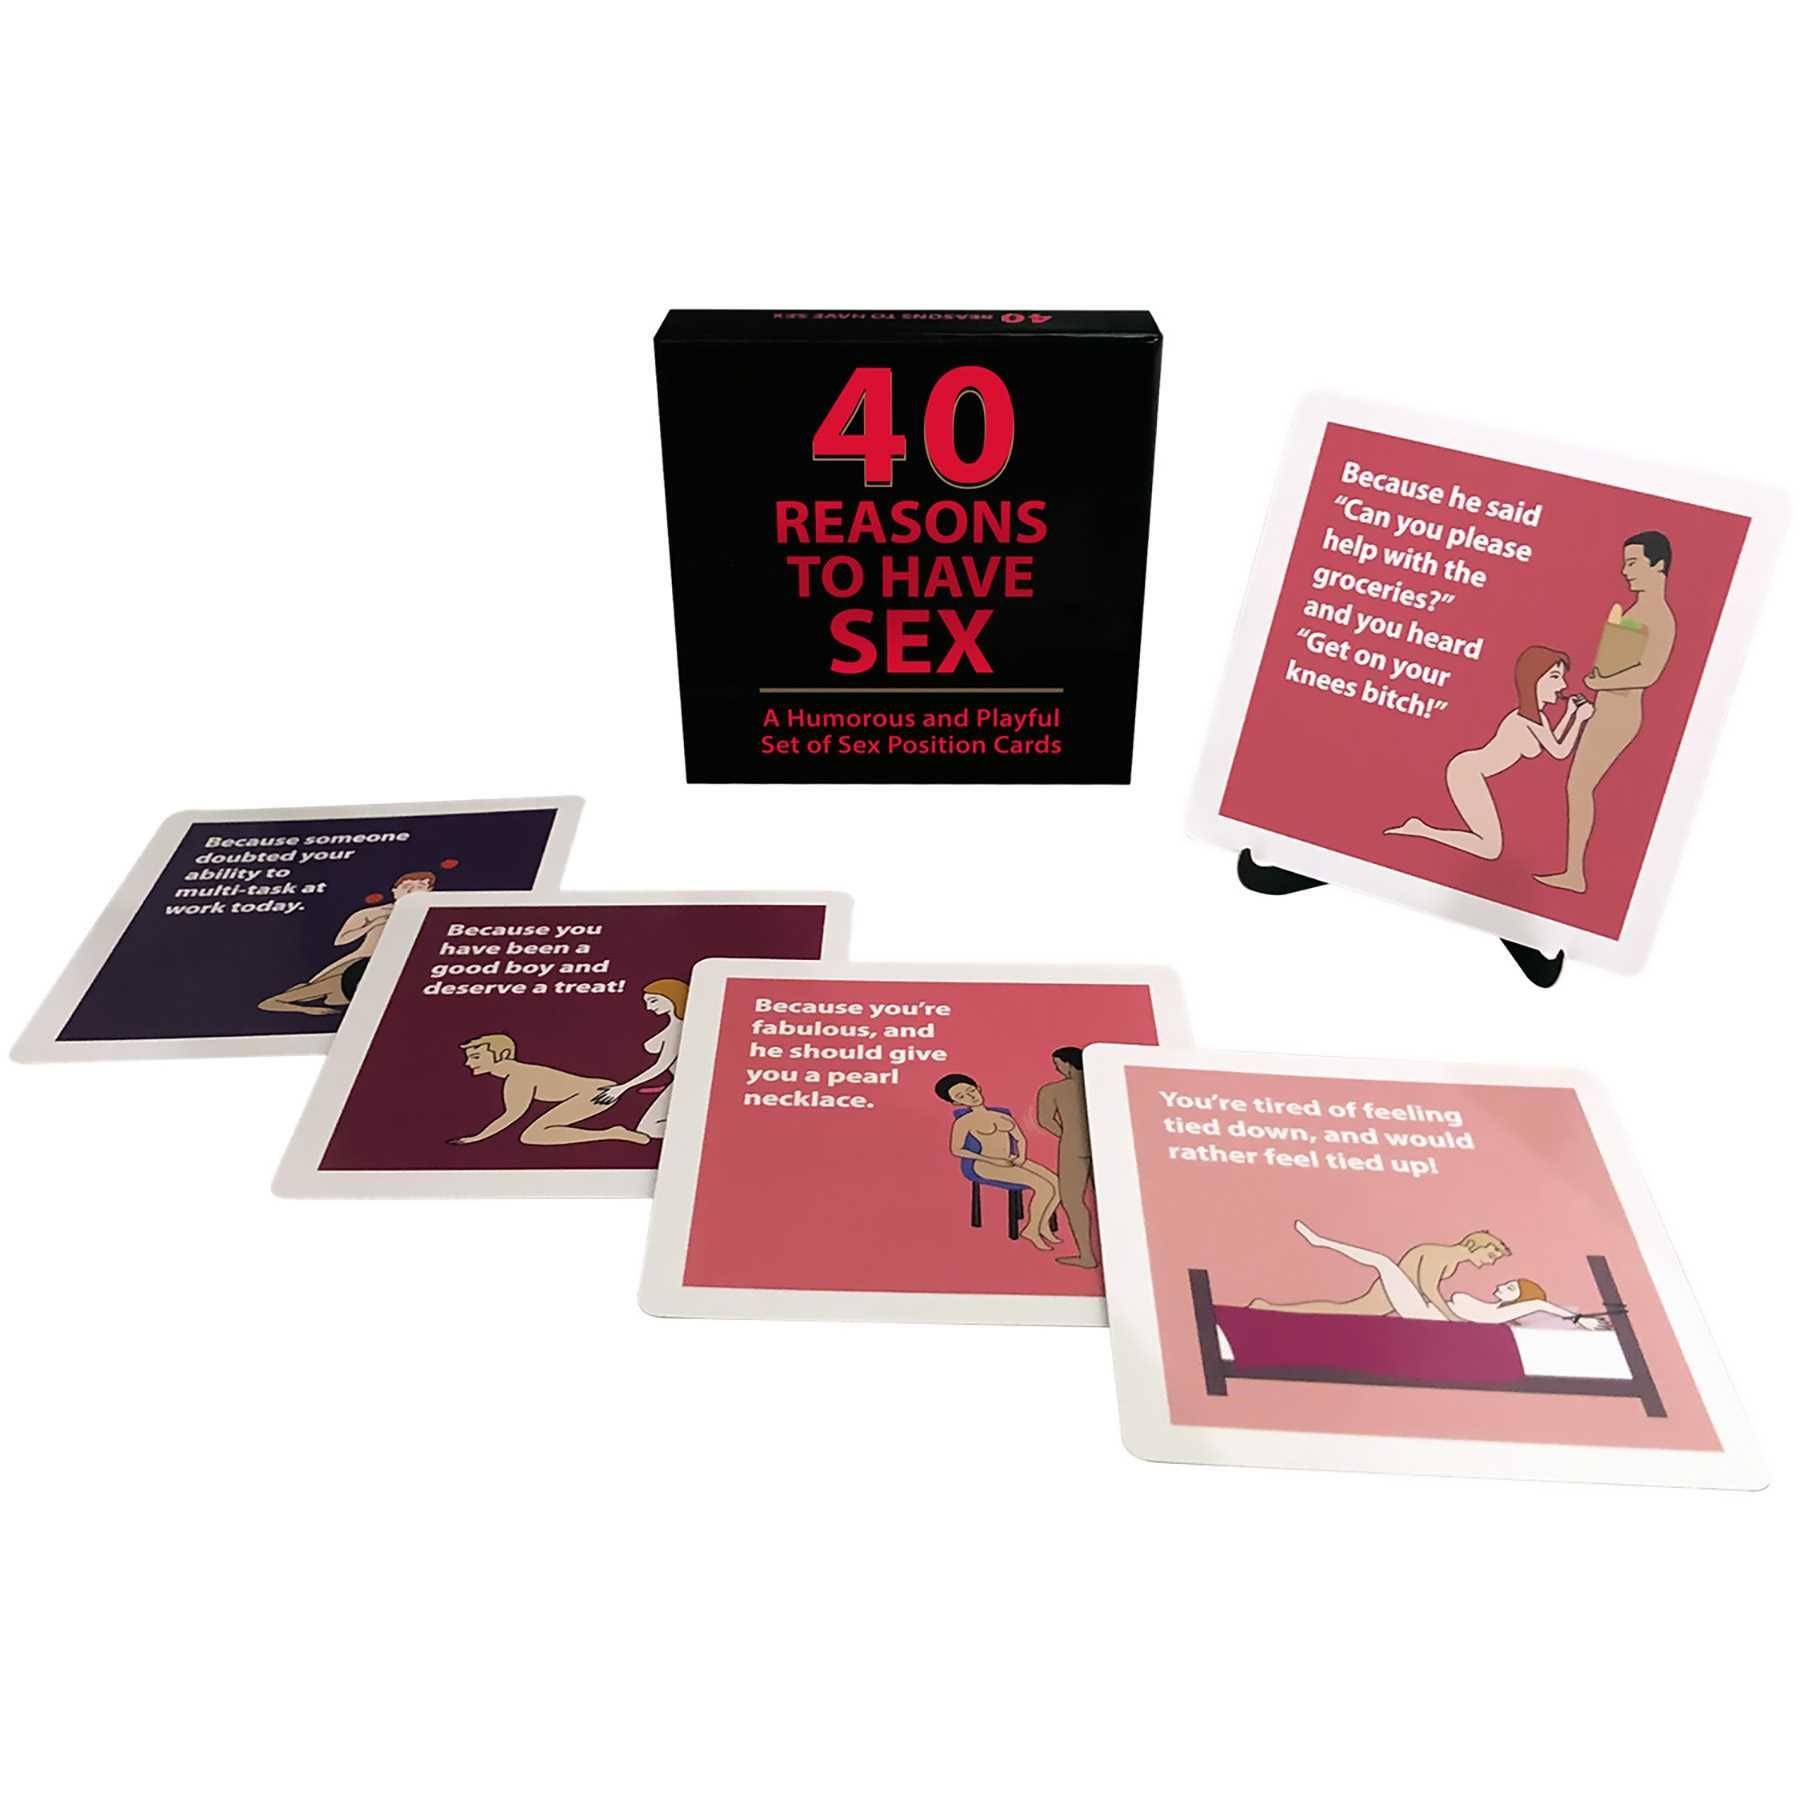 40 Reasons to have sex game contents